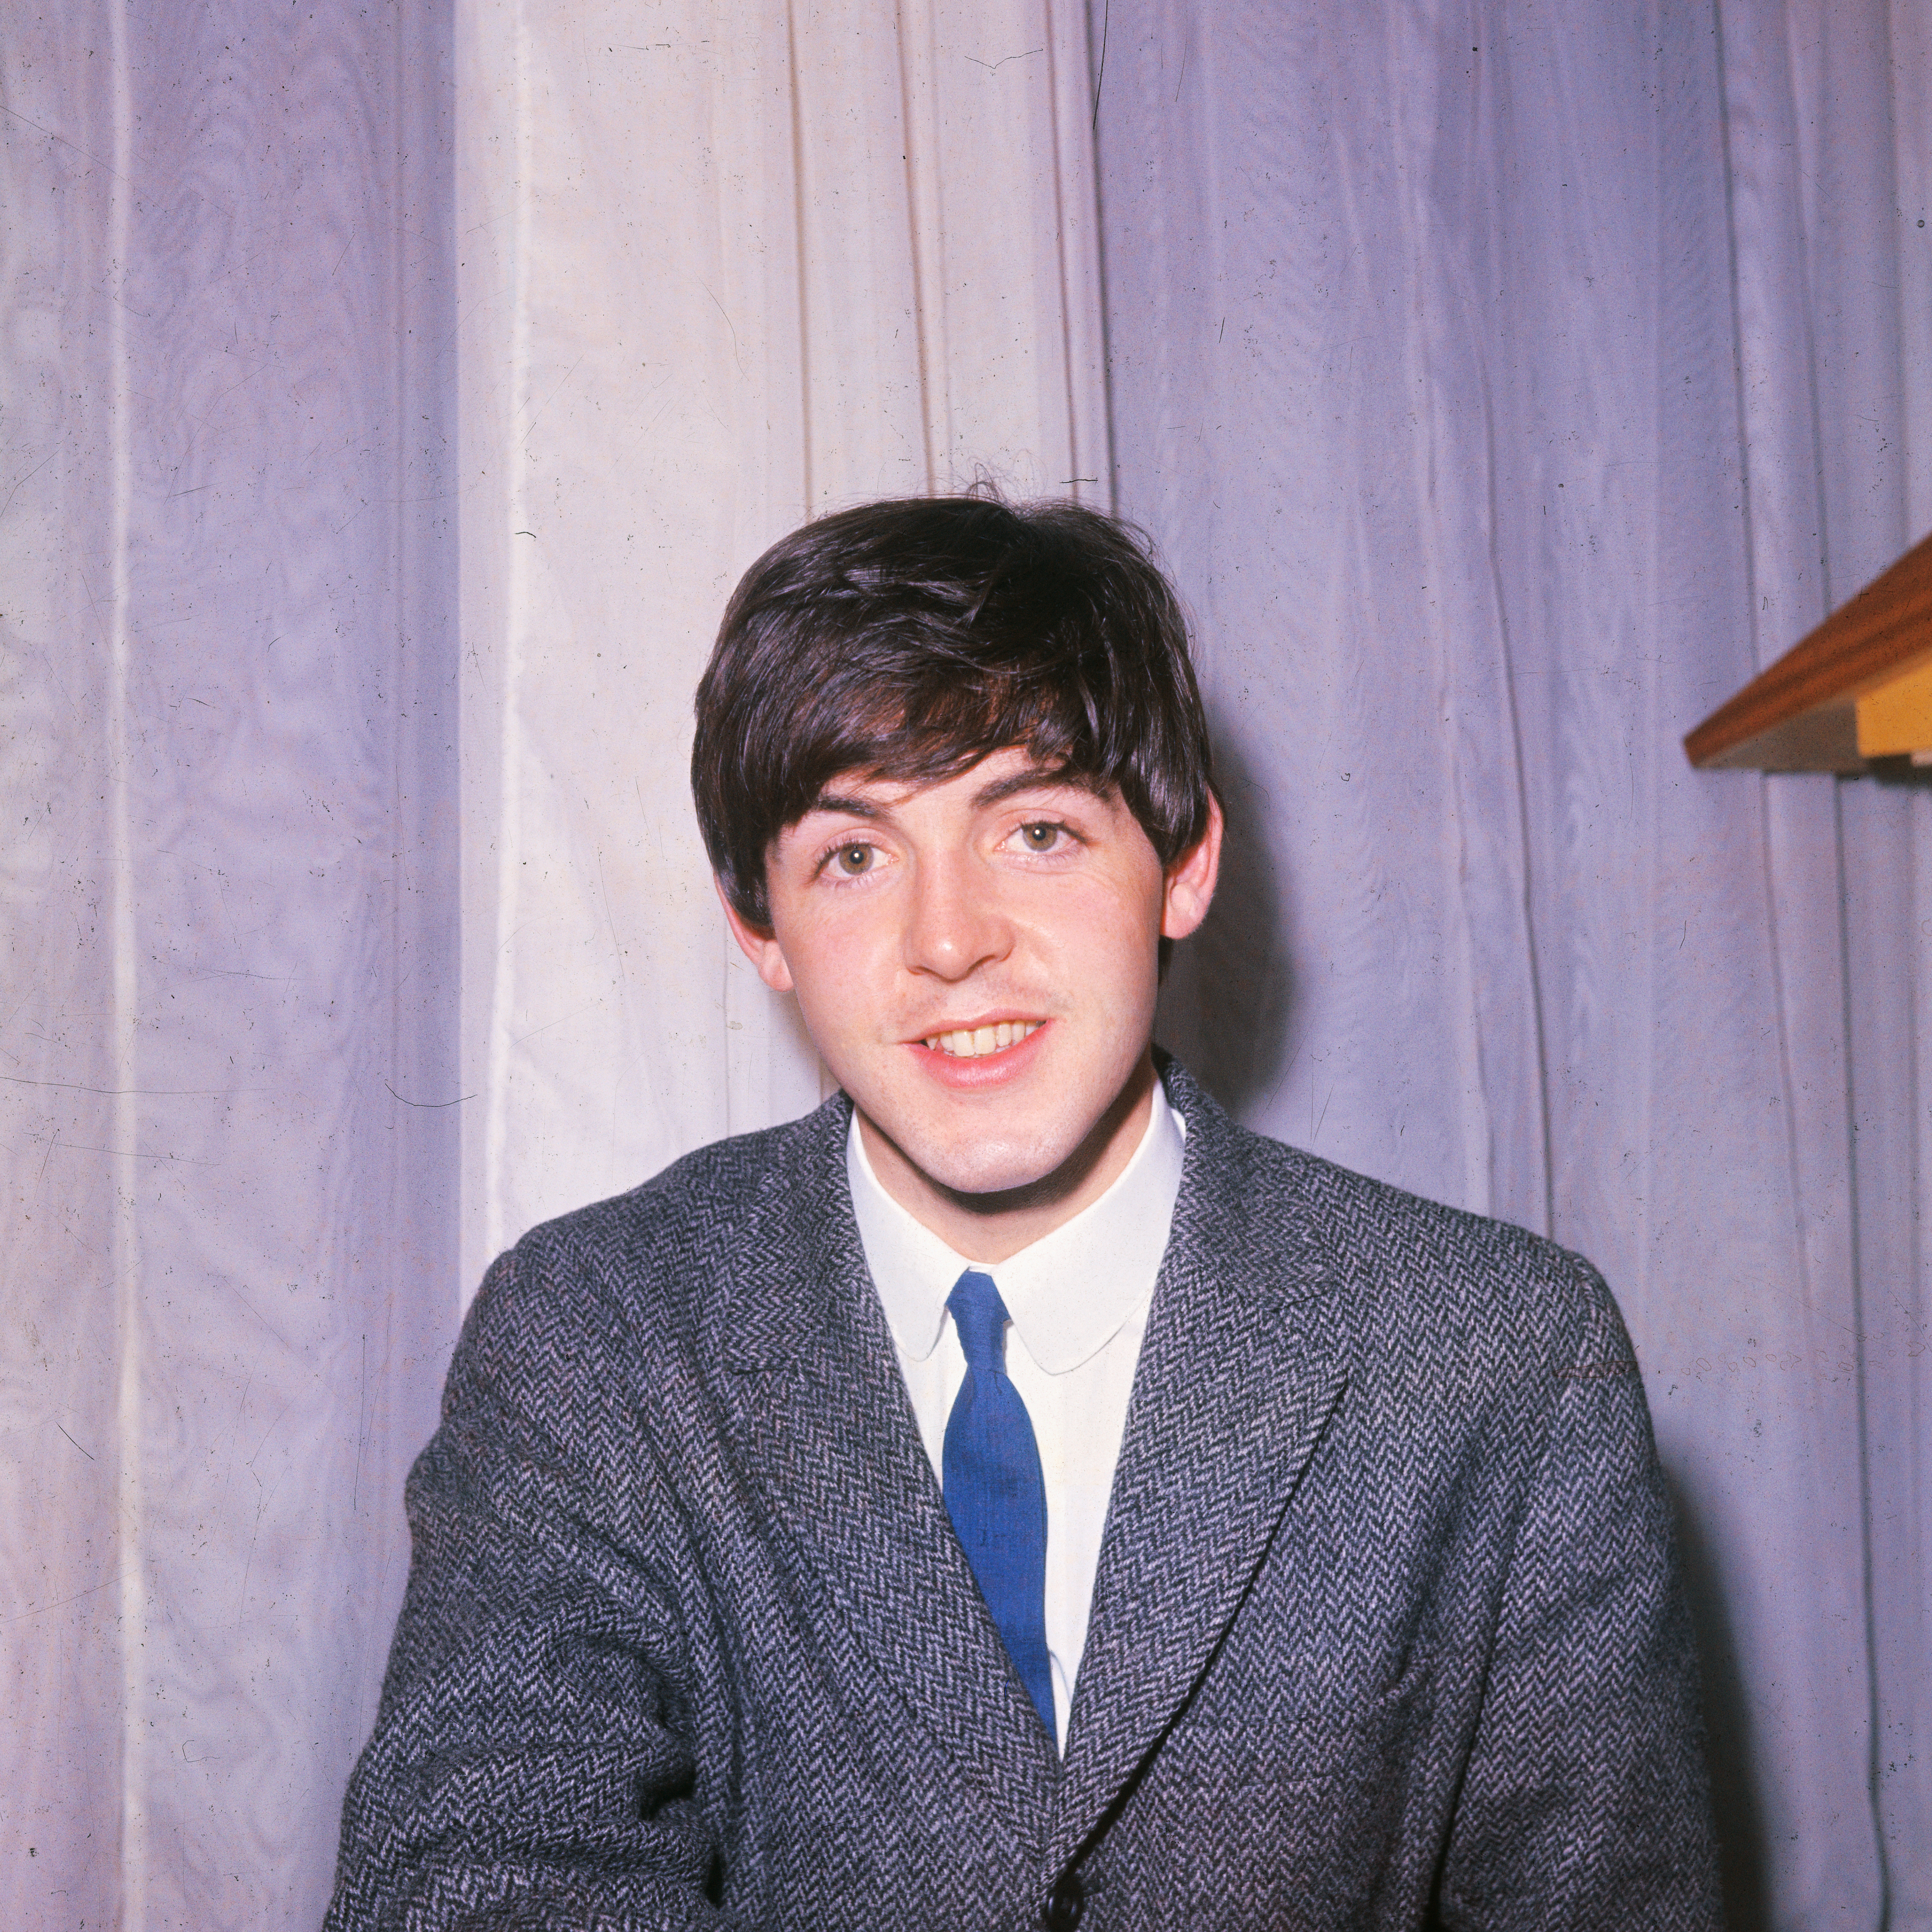 Paul McCartney's portrait in 1963 | Source: Getty Images